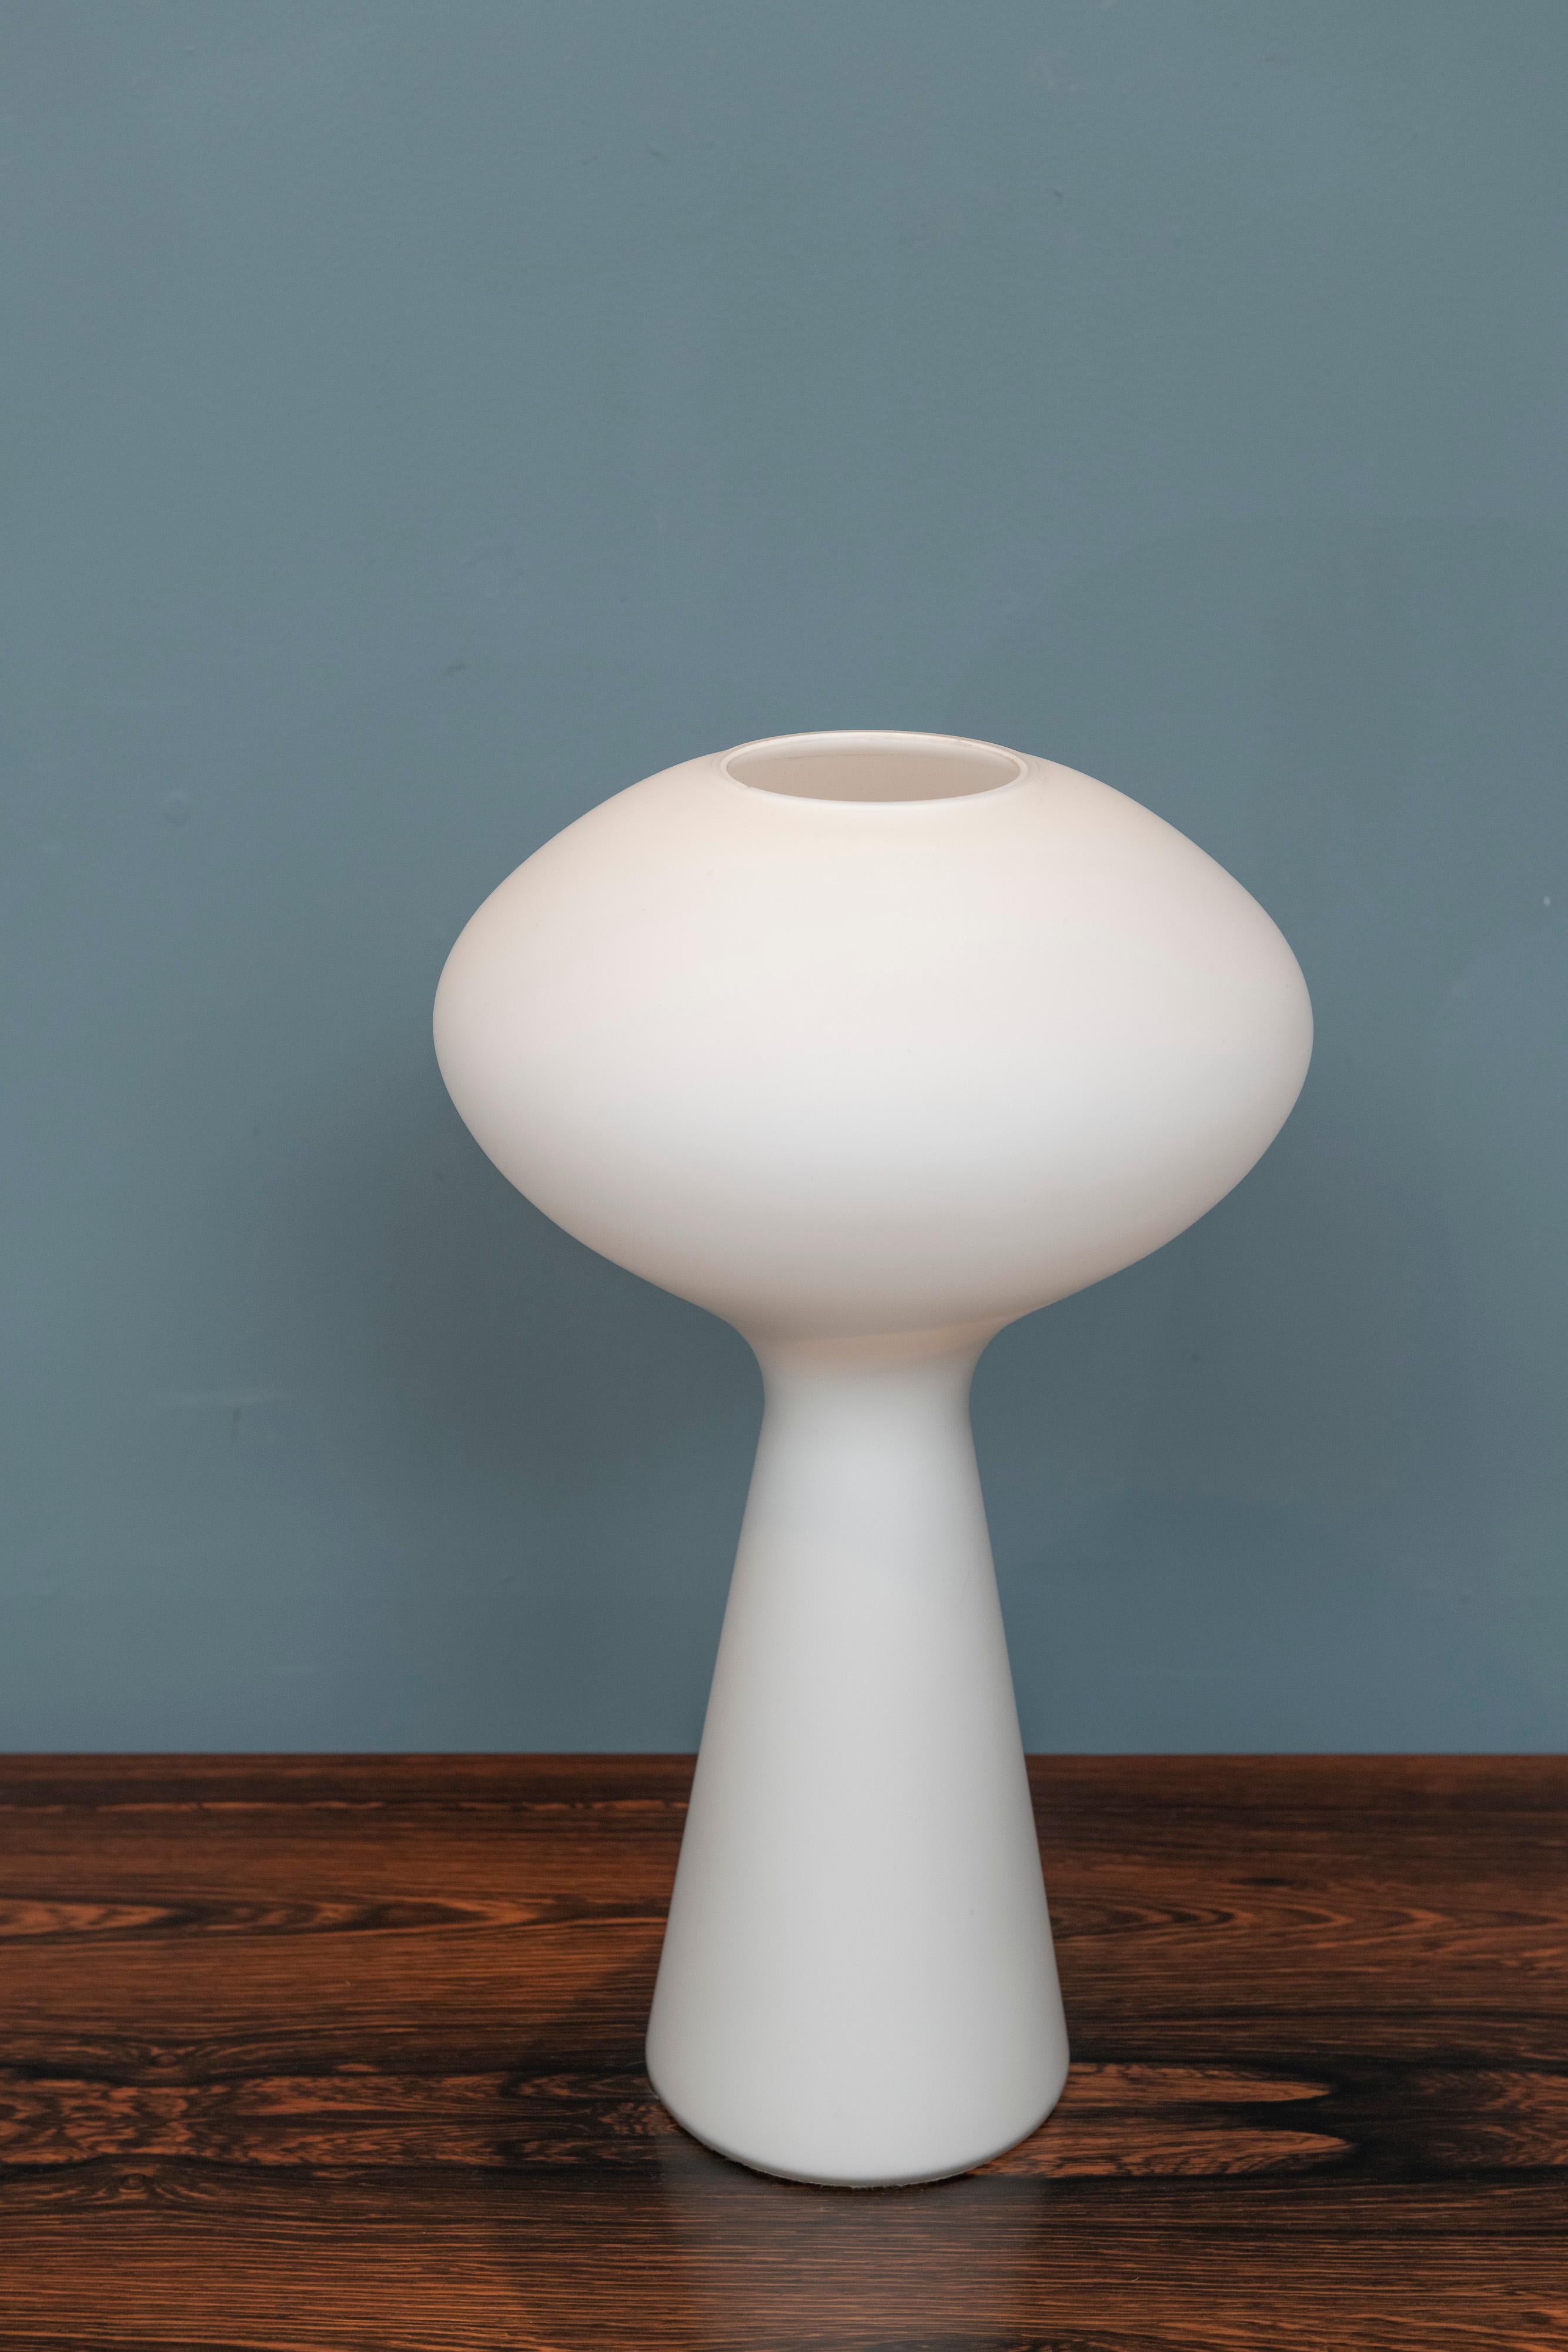 Lisa Johannson-Pape design blown glass onion table lamp, Sweden. Very good original condition in working condition with two small flea bite chips to top rim that are barely noticeable.